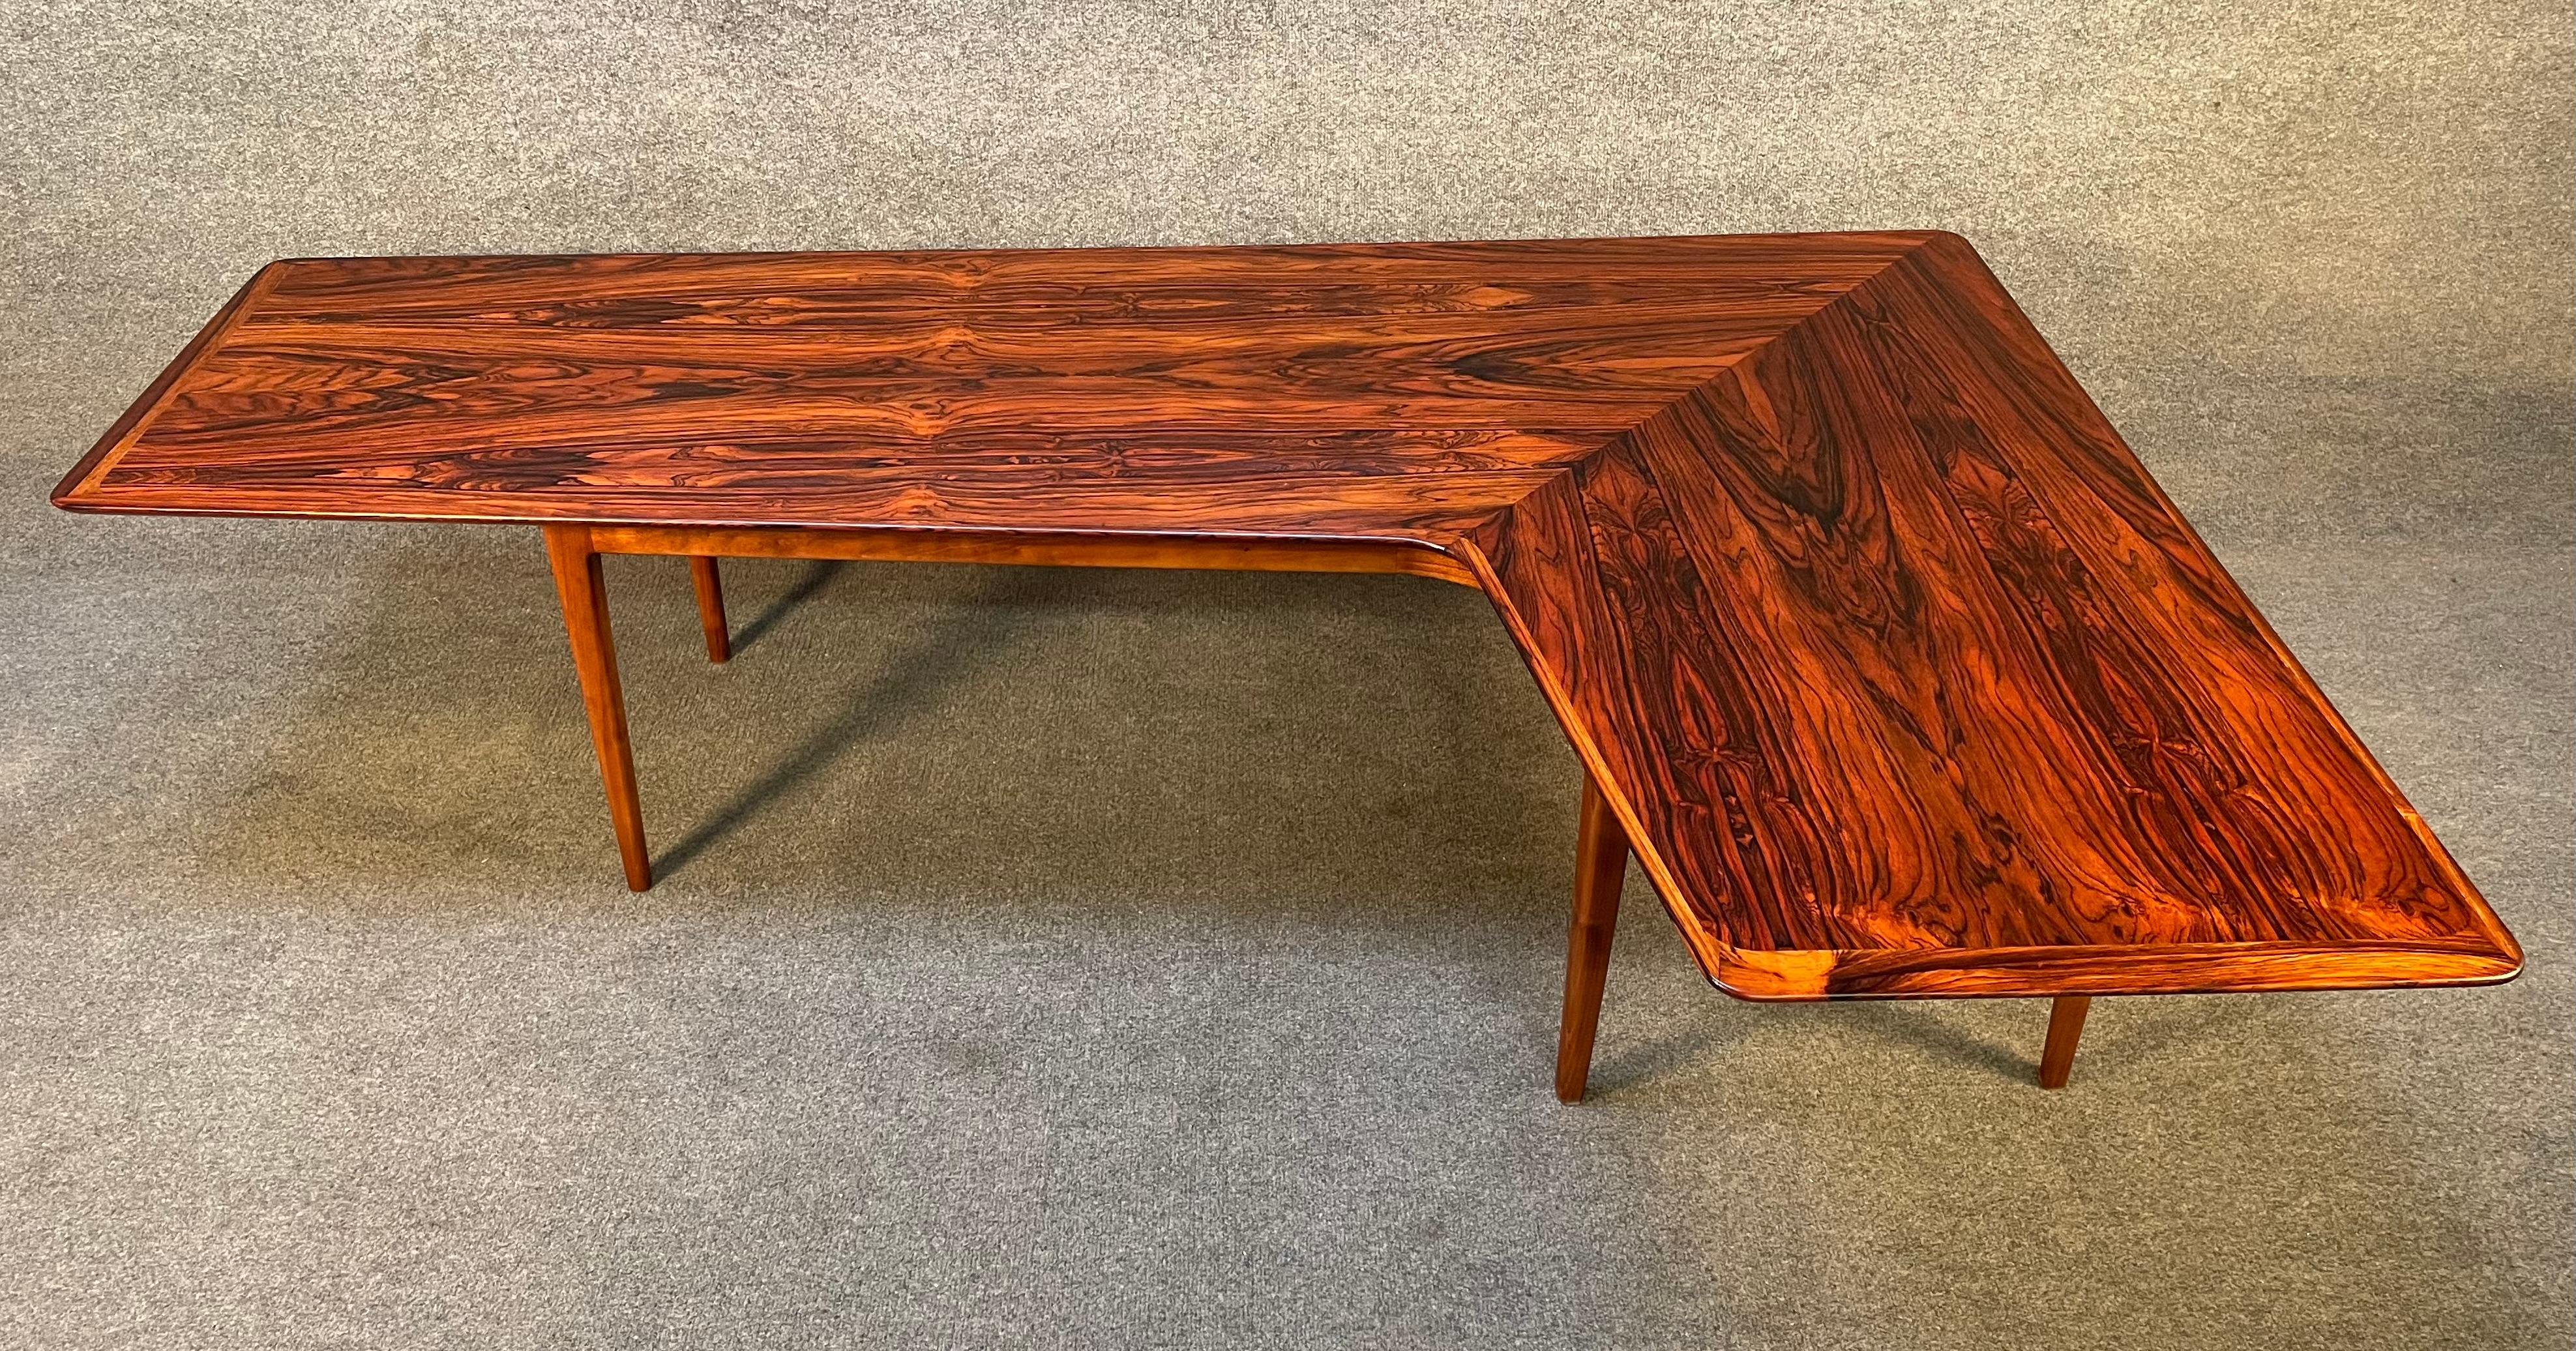 Here is an incredible Scandinavian modern cocktail table in rosewood manufactured in Denmark in the 1960's.
This special table, recently imported from Europe to California before its refinishing, feature a large top in the shape of a boomerang,